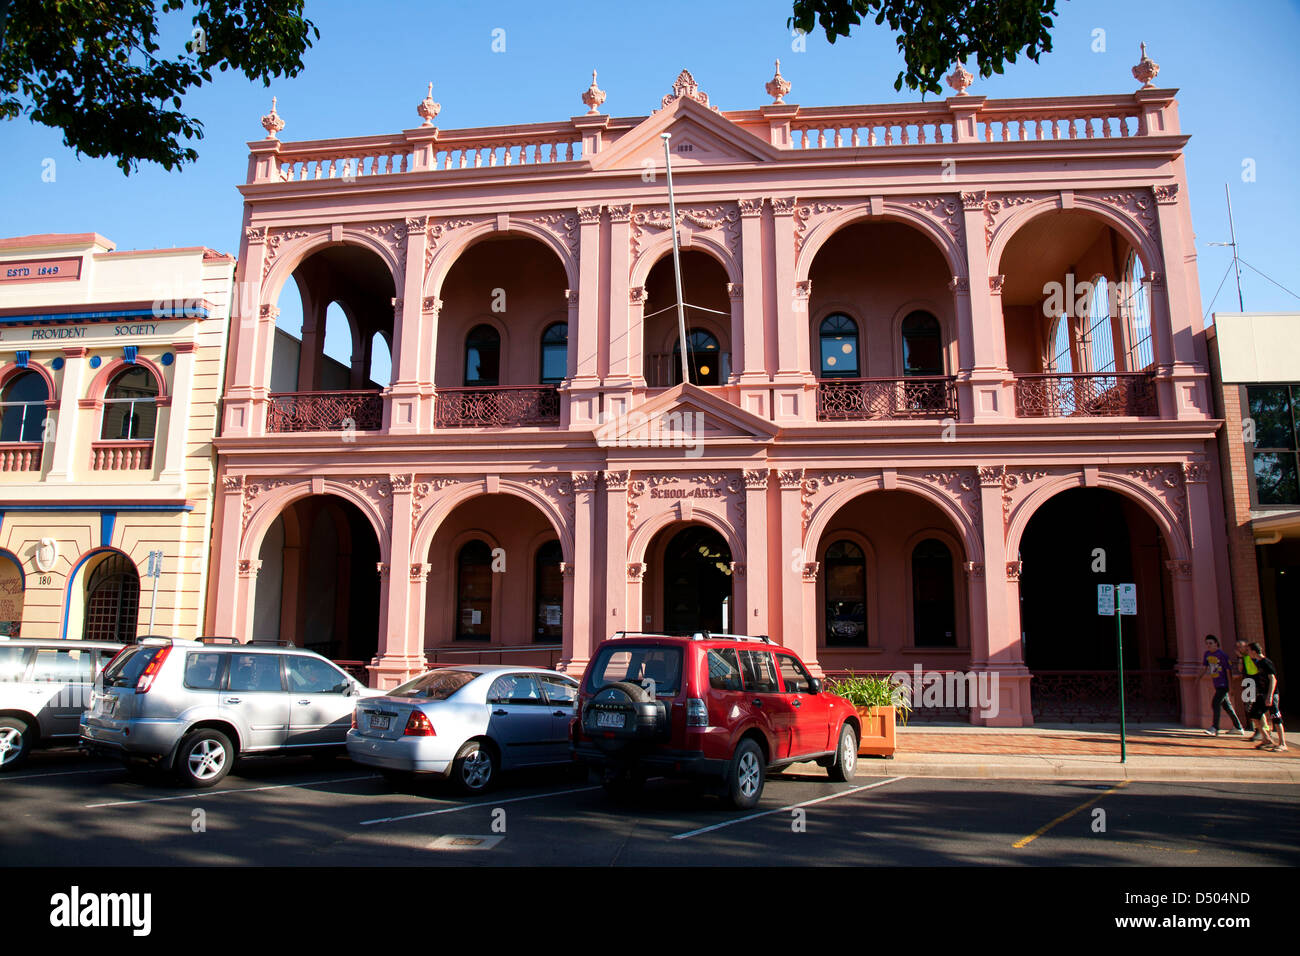 The School of Arts Building constructed 1889 one of many historic buildings along Bourbong Street Bundaberg Queensland Australia Stock Photo